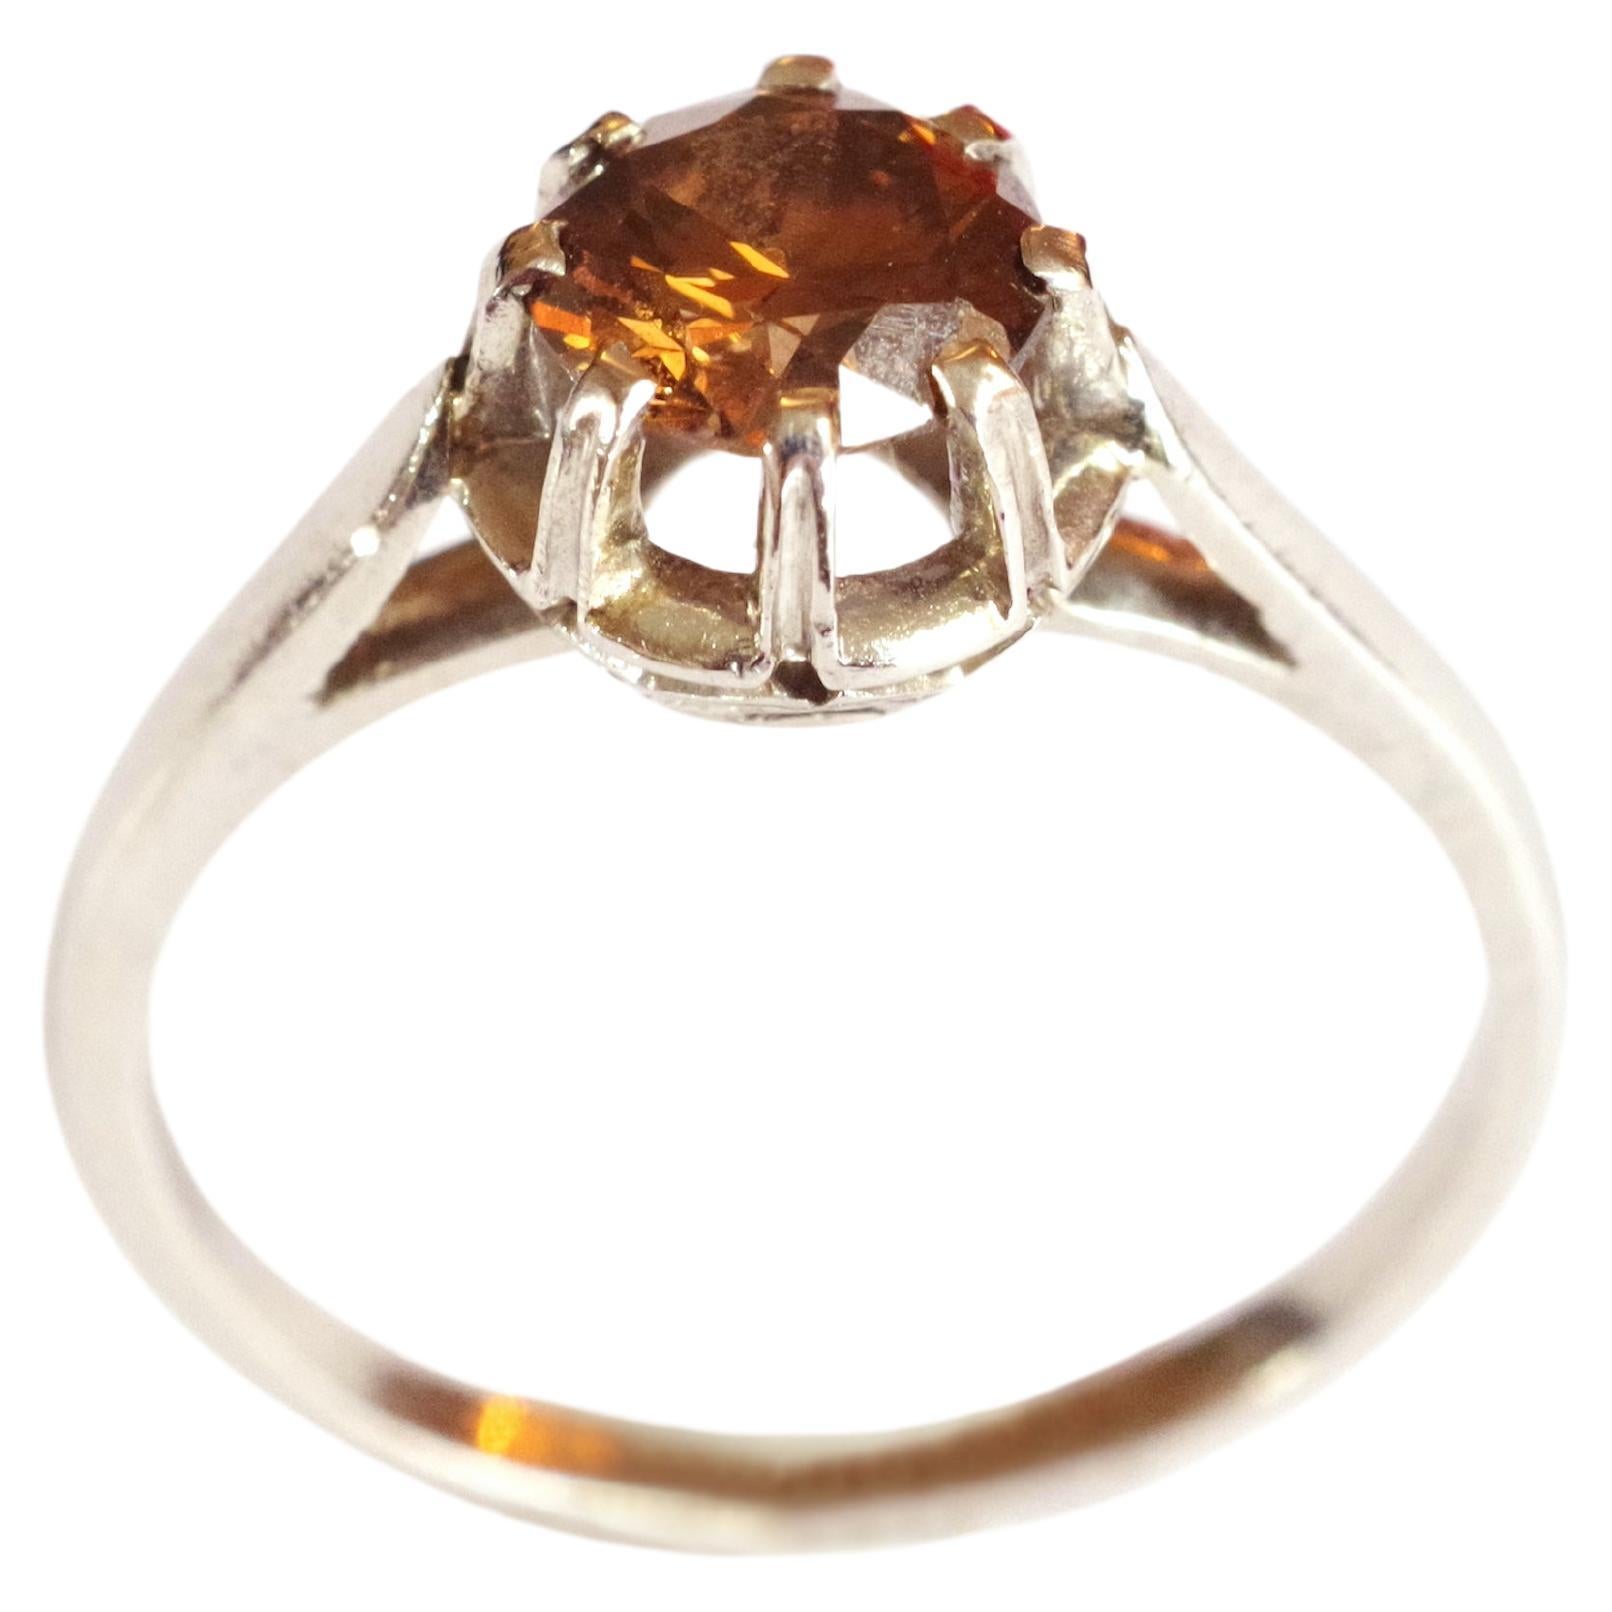 Fancy Brown Diamond Solitaire Ring in Platinum, Art Deco Setting For Sale